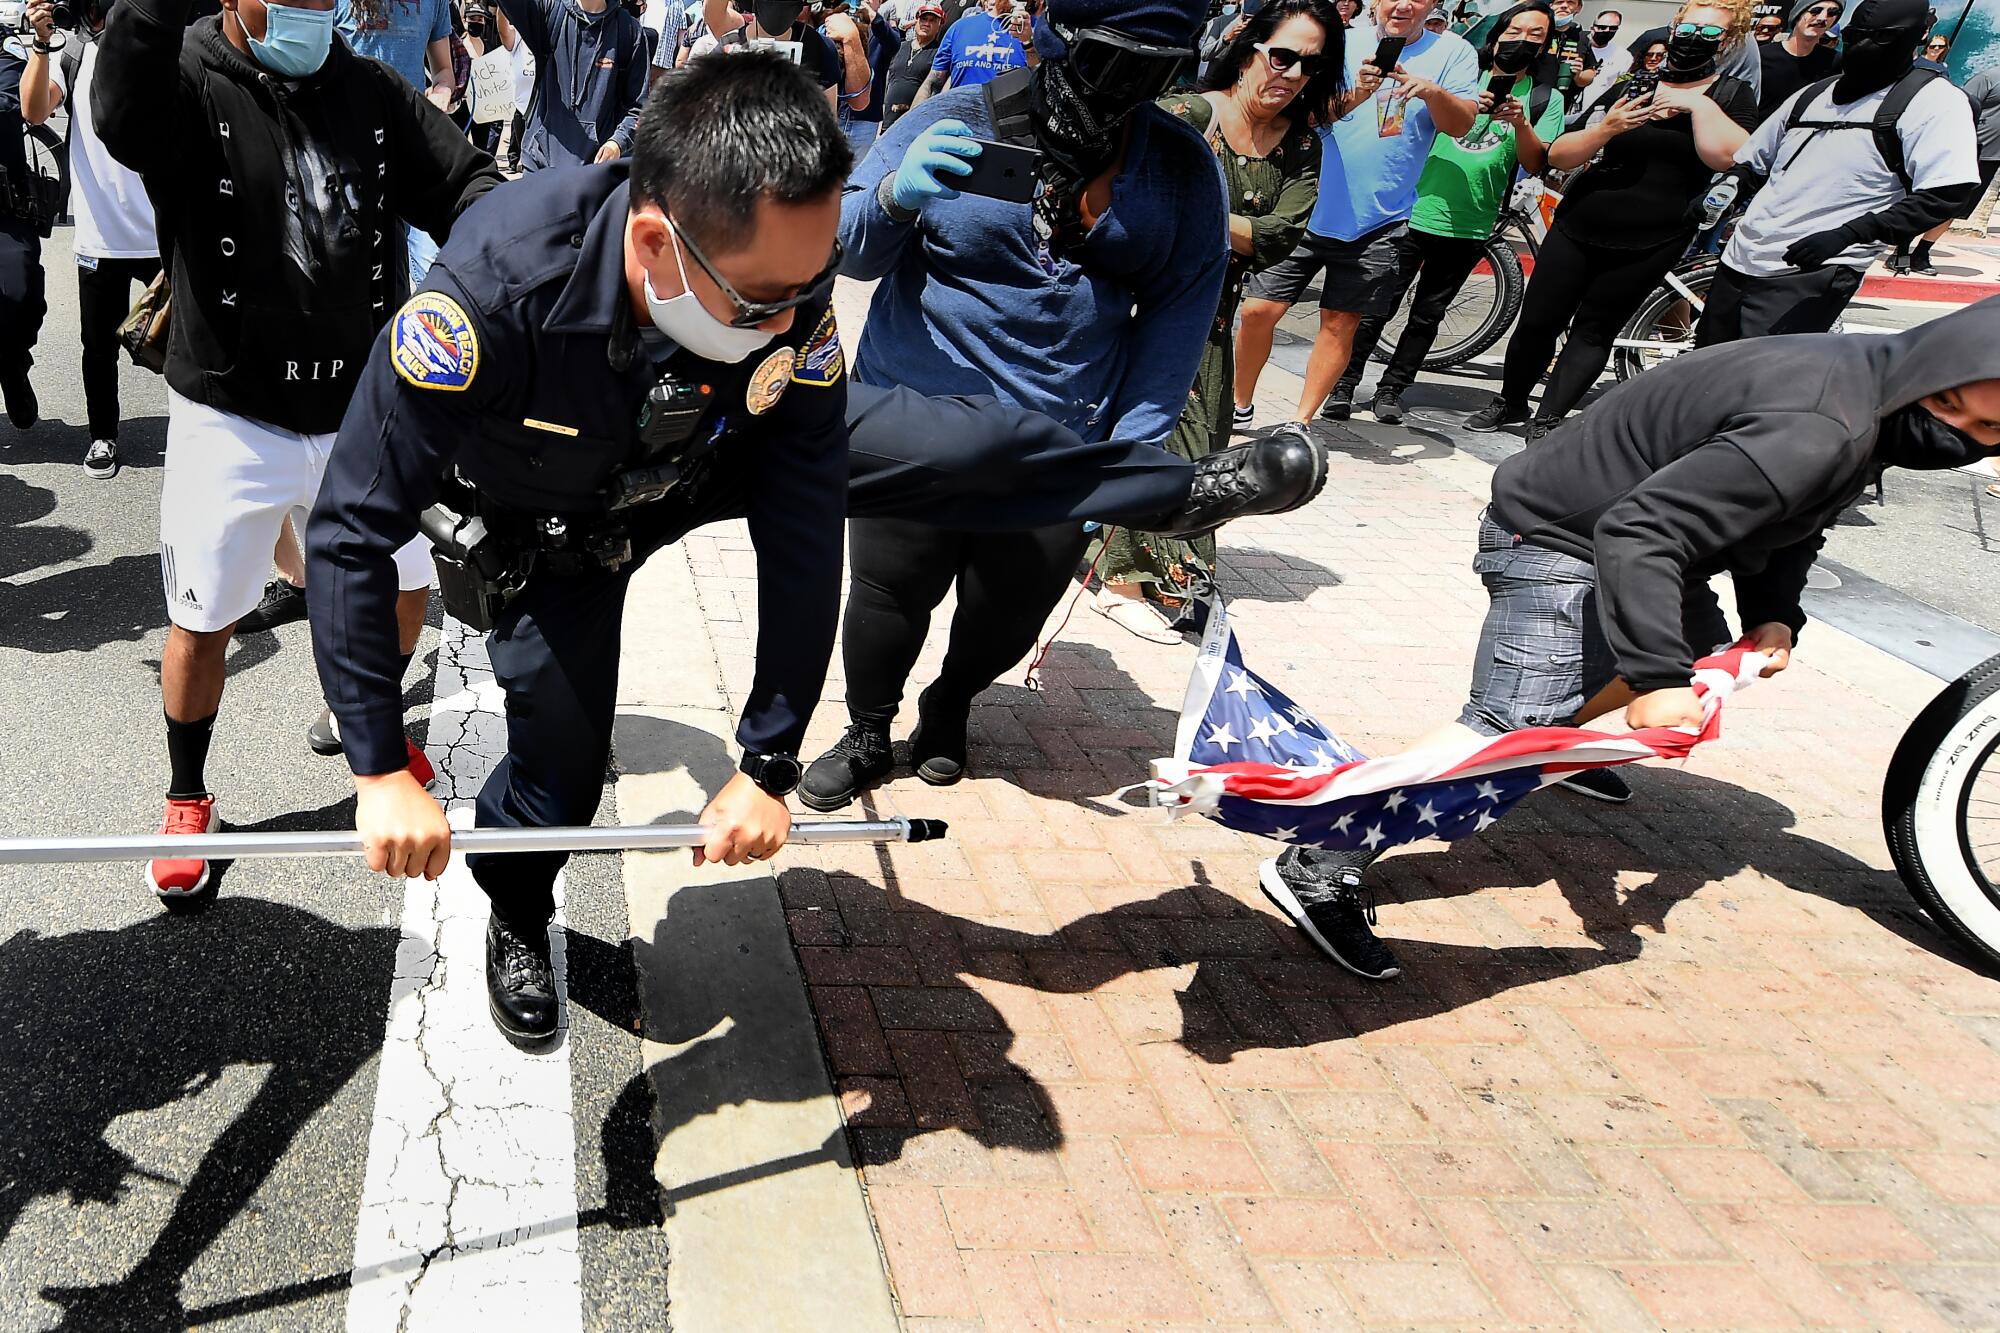 A crowd watches a police officer trying to intervene as a man takes an American flag